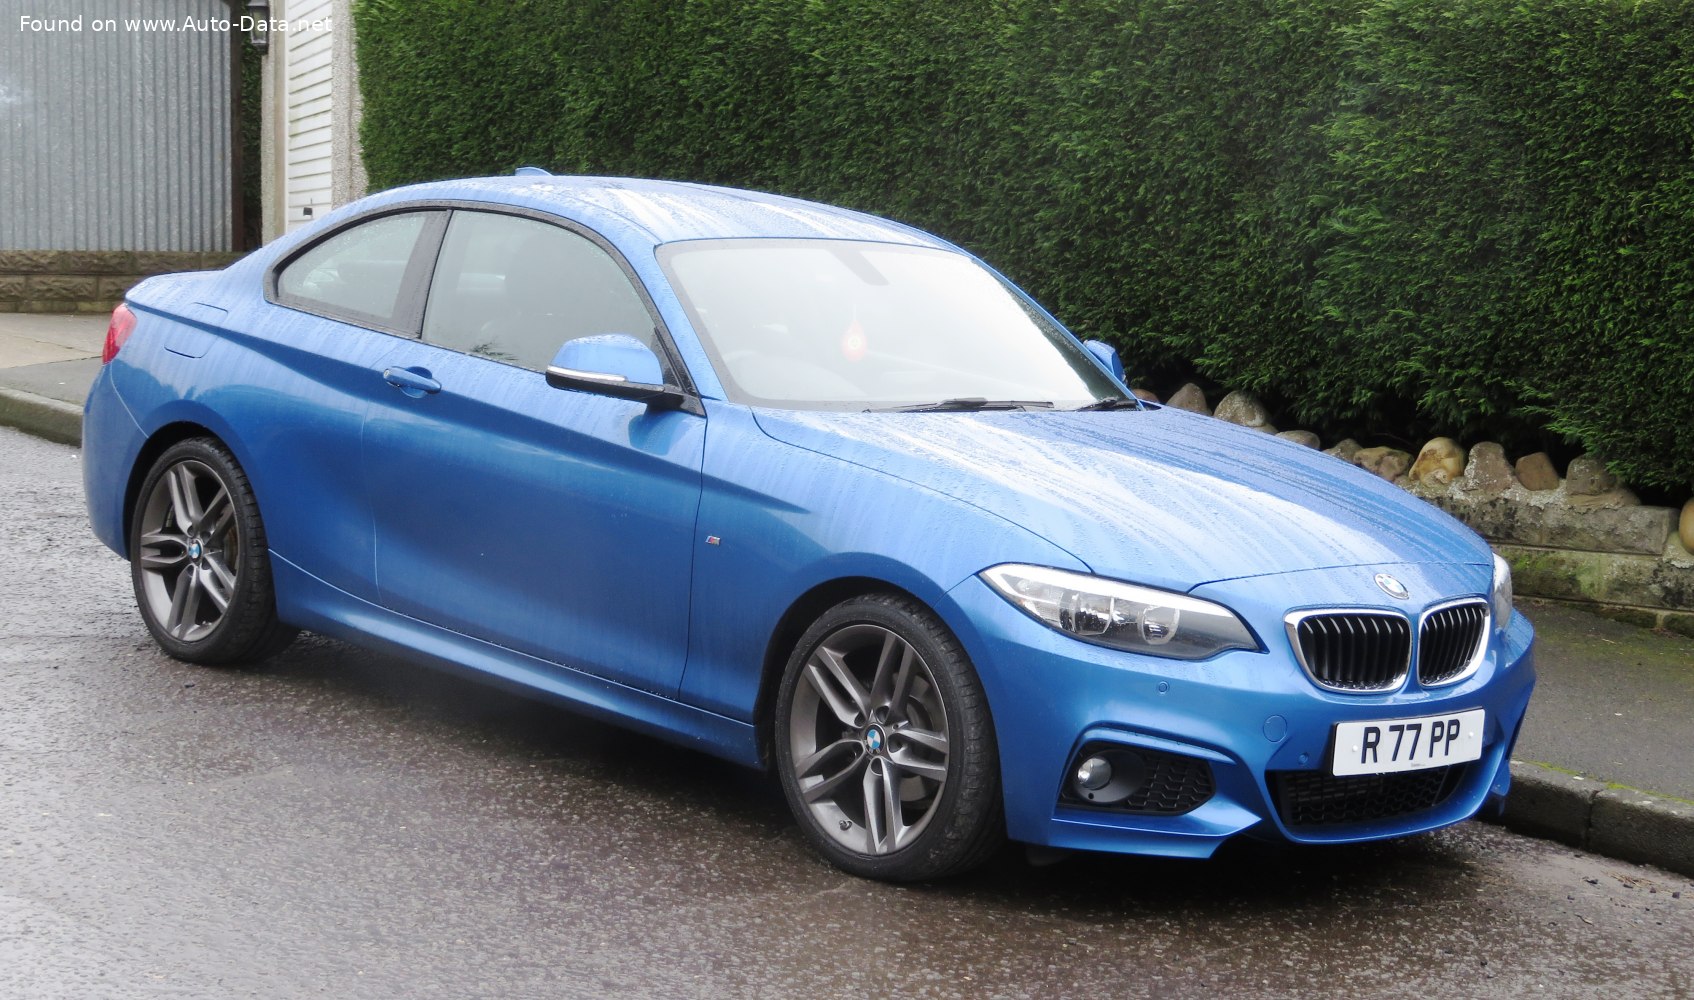 2014 BMW 2 Series Coupe (F22) M235i (326 Hp)  Technical specs, data, fuel  consumption, Dimensions